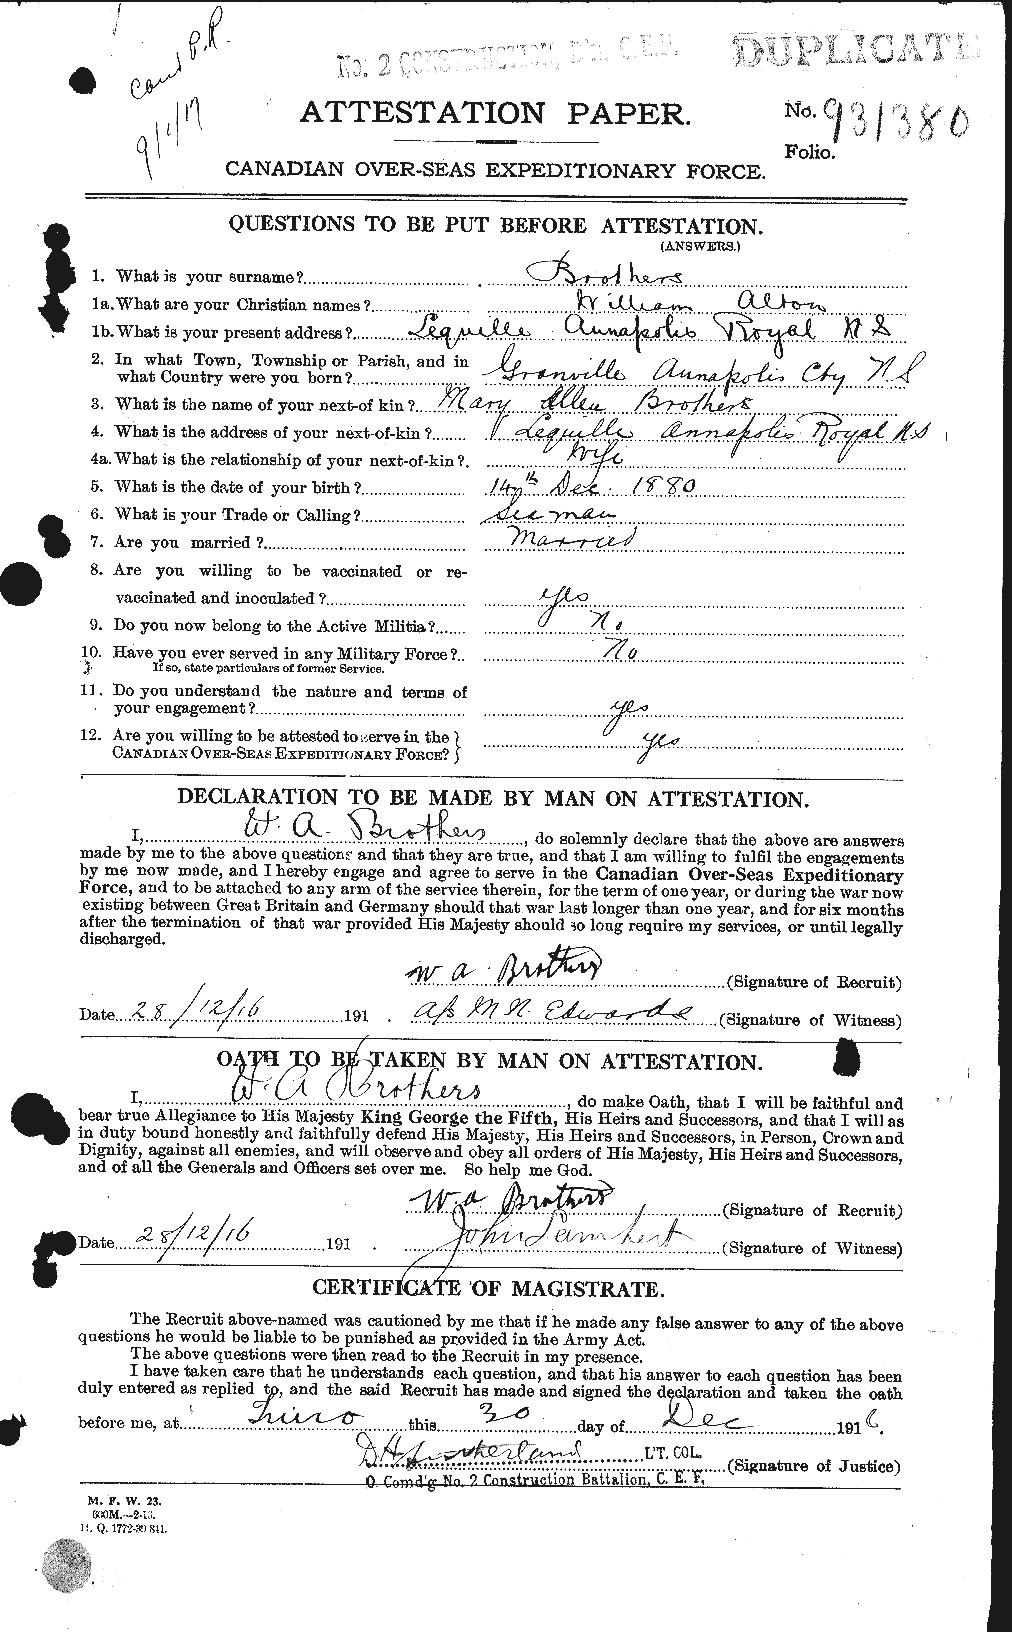 Personnel Records of the First World War - CEF 264972a